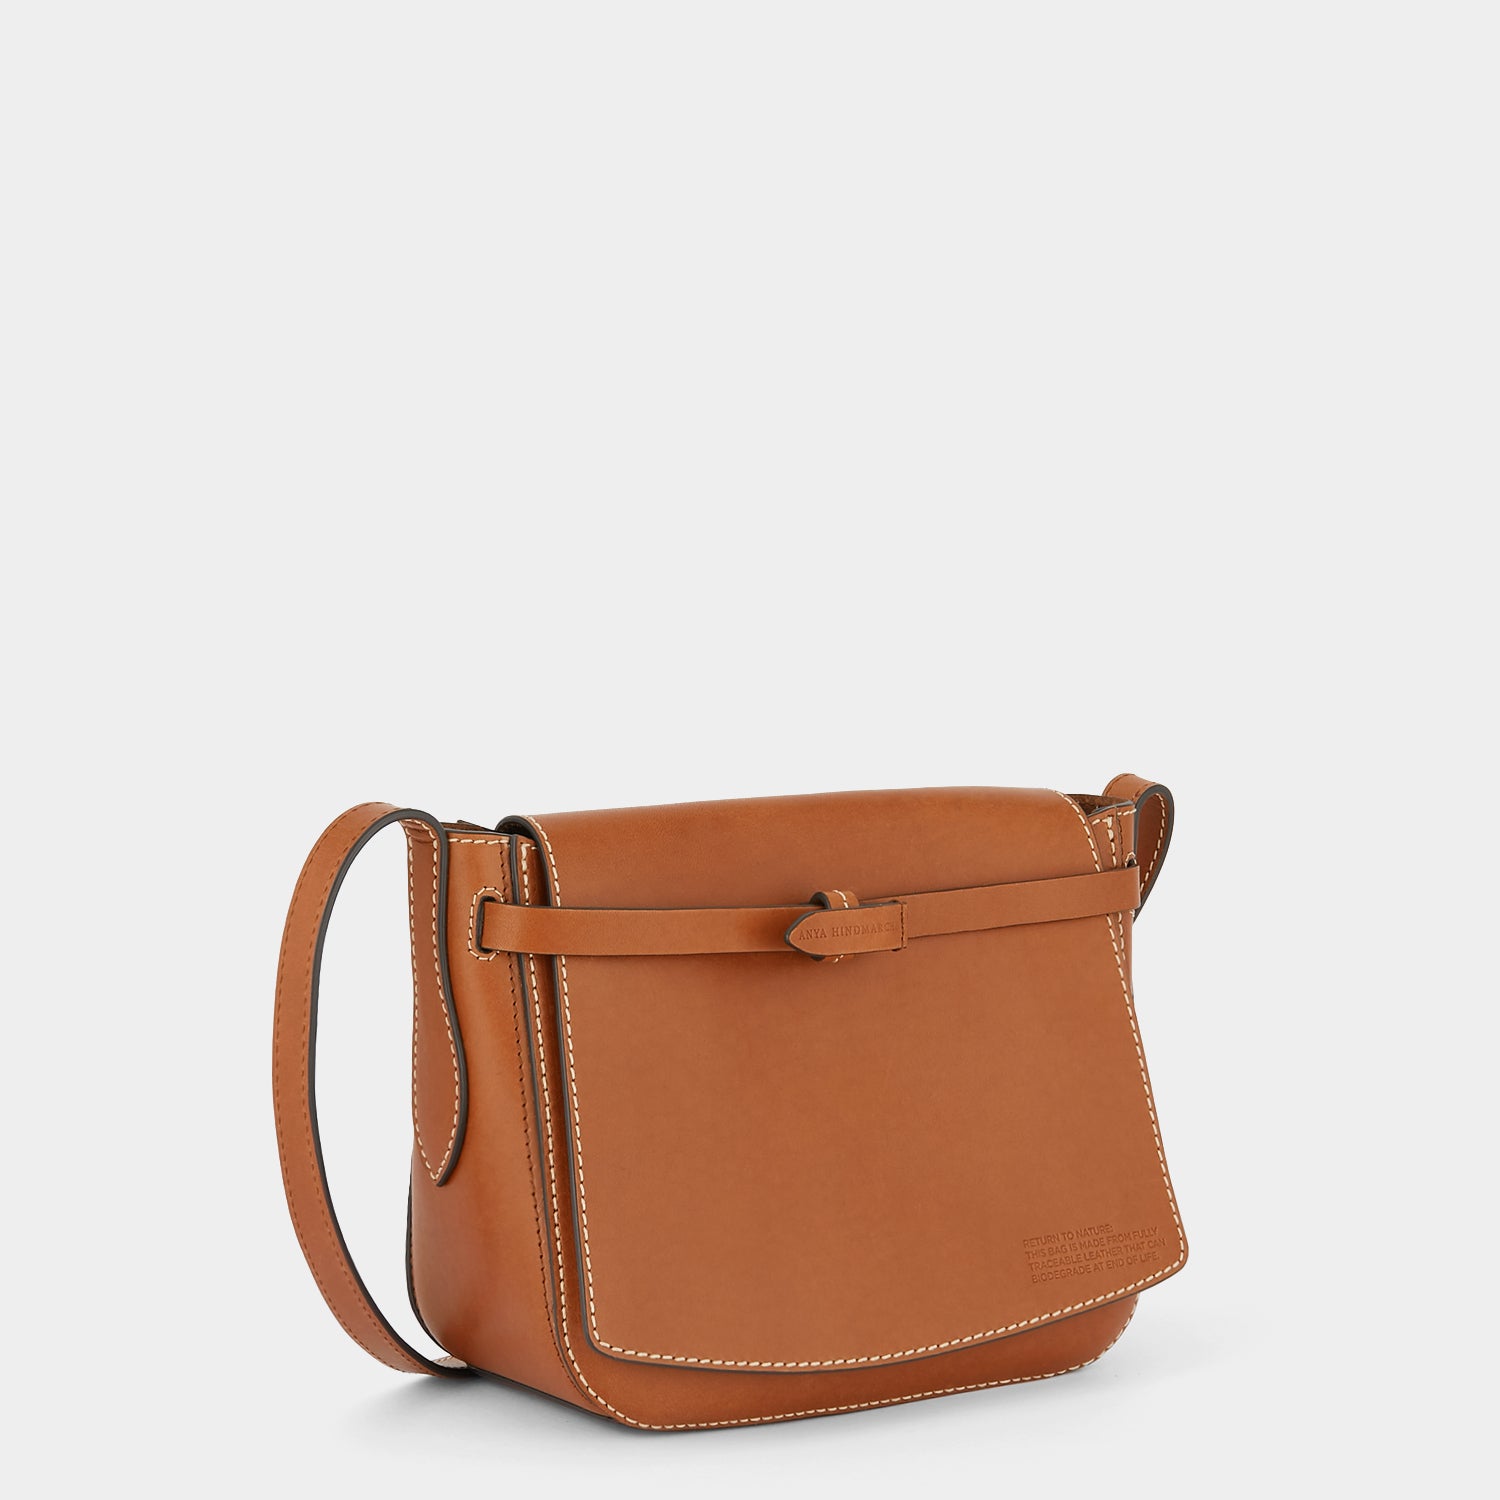 Return to Nature Cross-body -

                  
                    Compostable Leather in Tan -
                  

                  Anya Hindmarch UK
